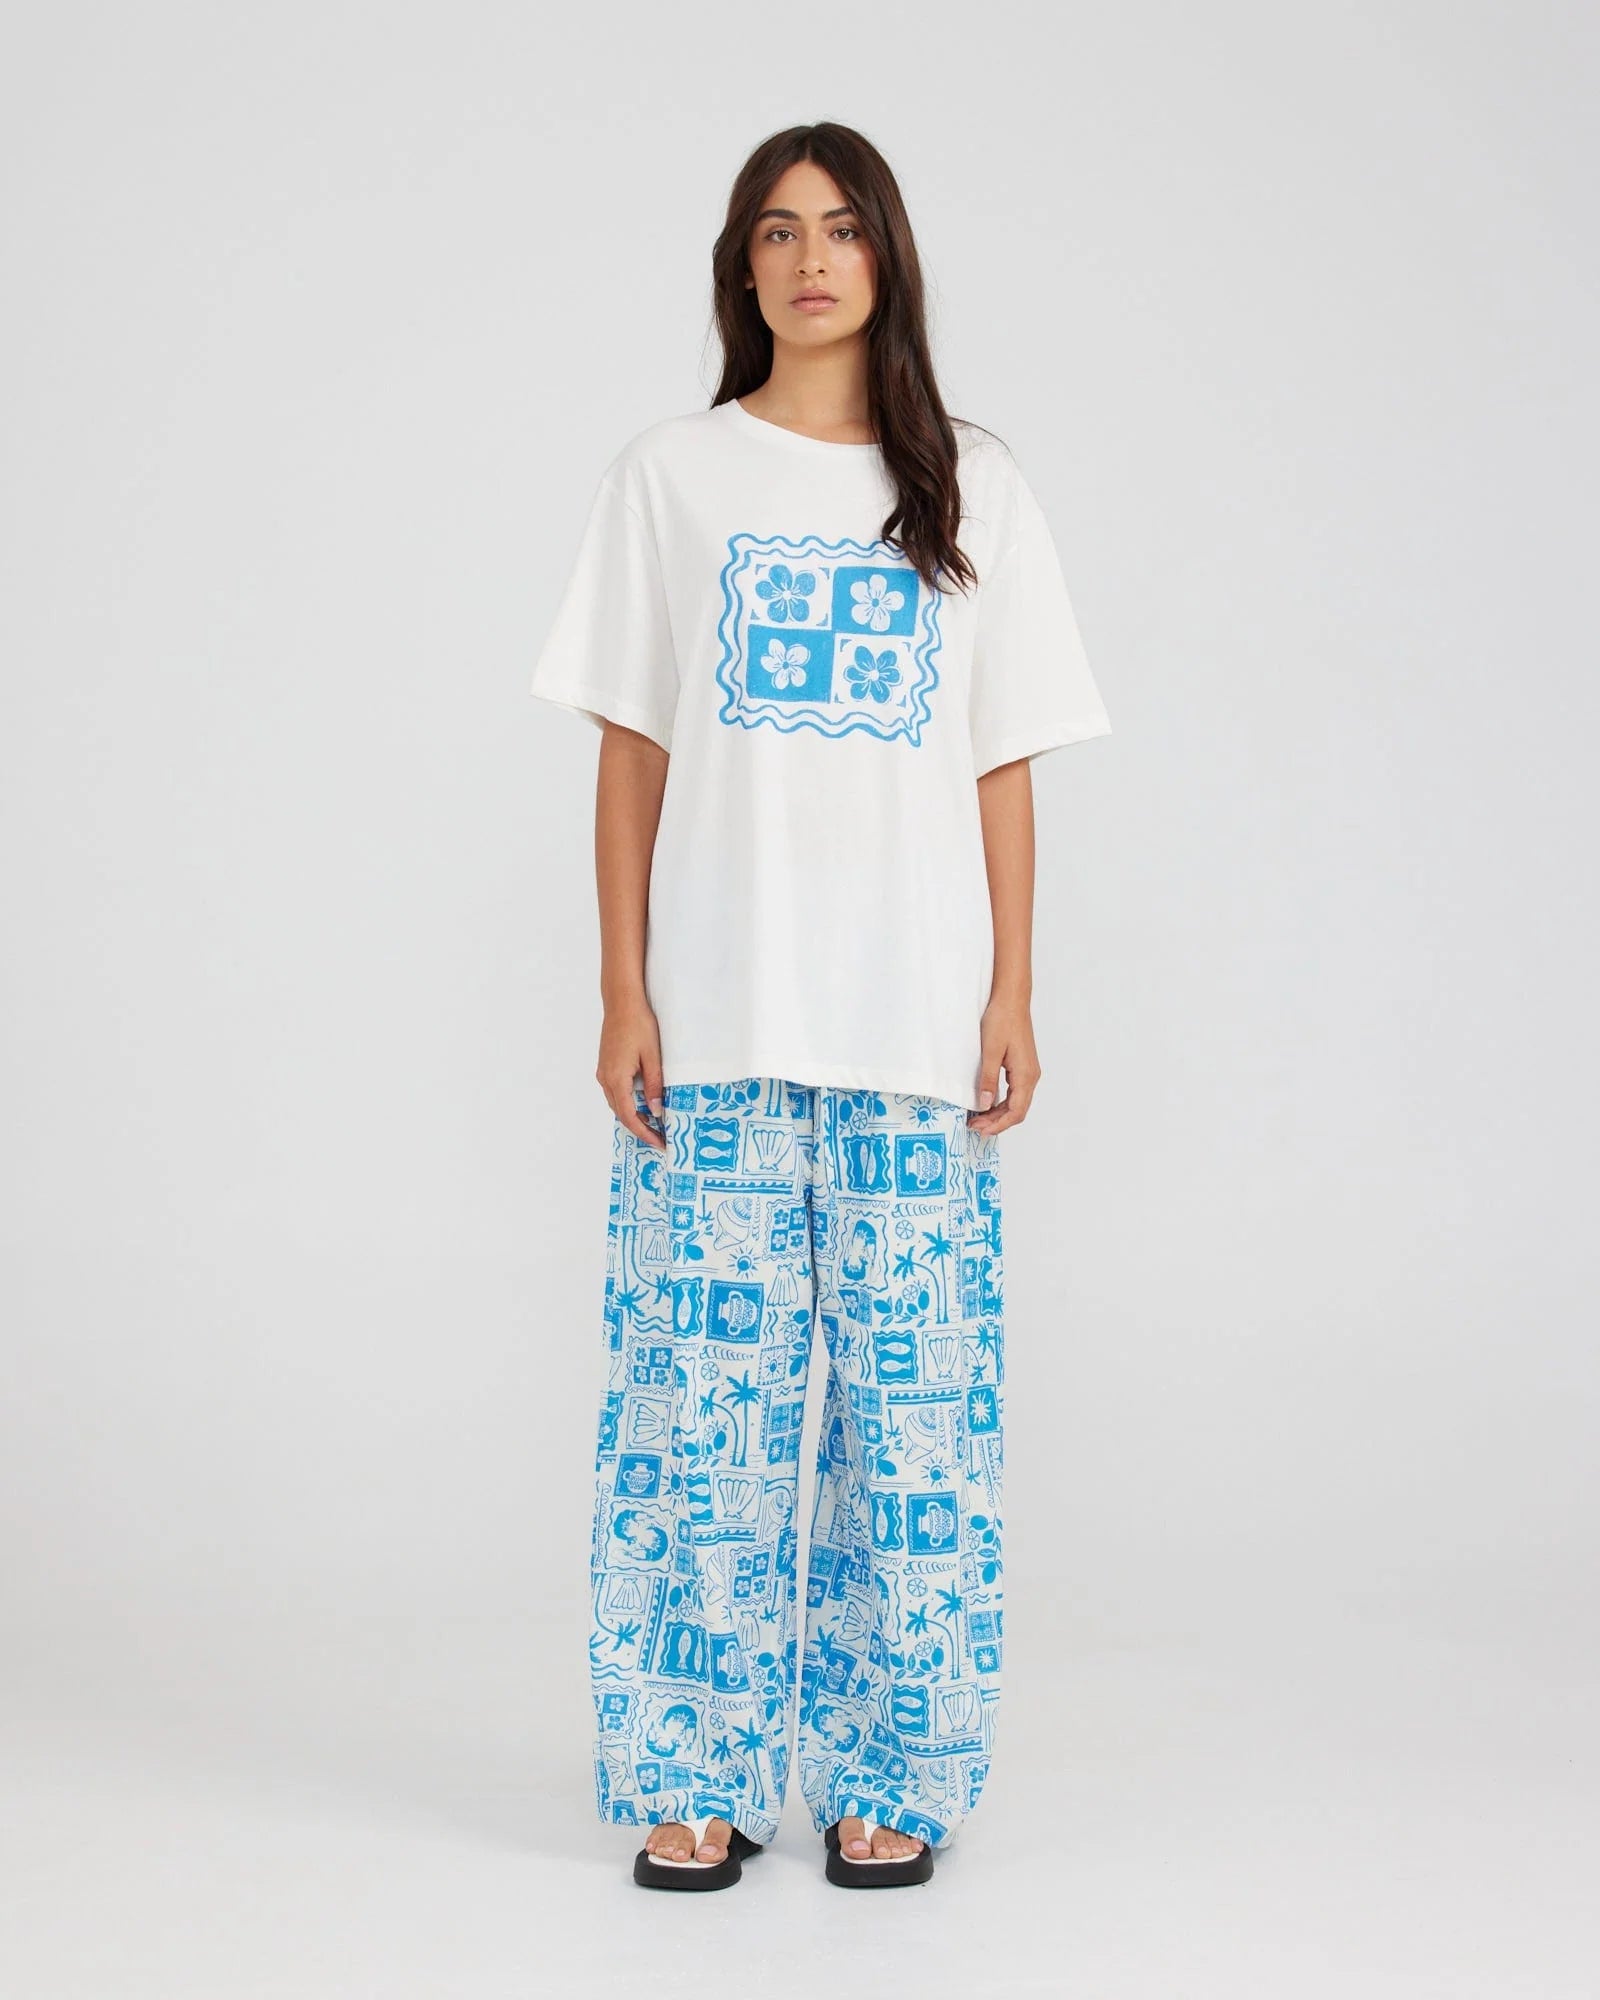 CHARLIE HOLIDAY tile floral boyfriend tee - white